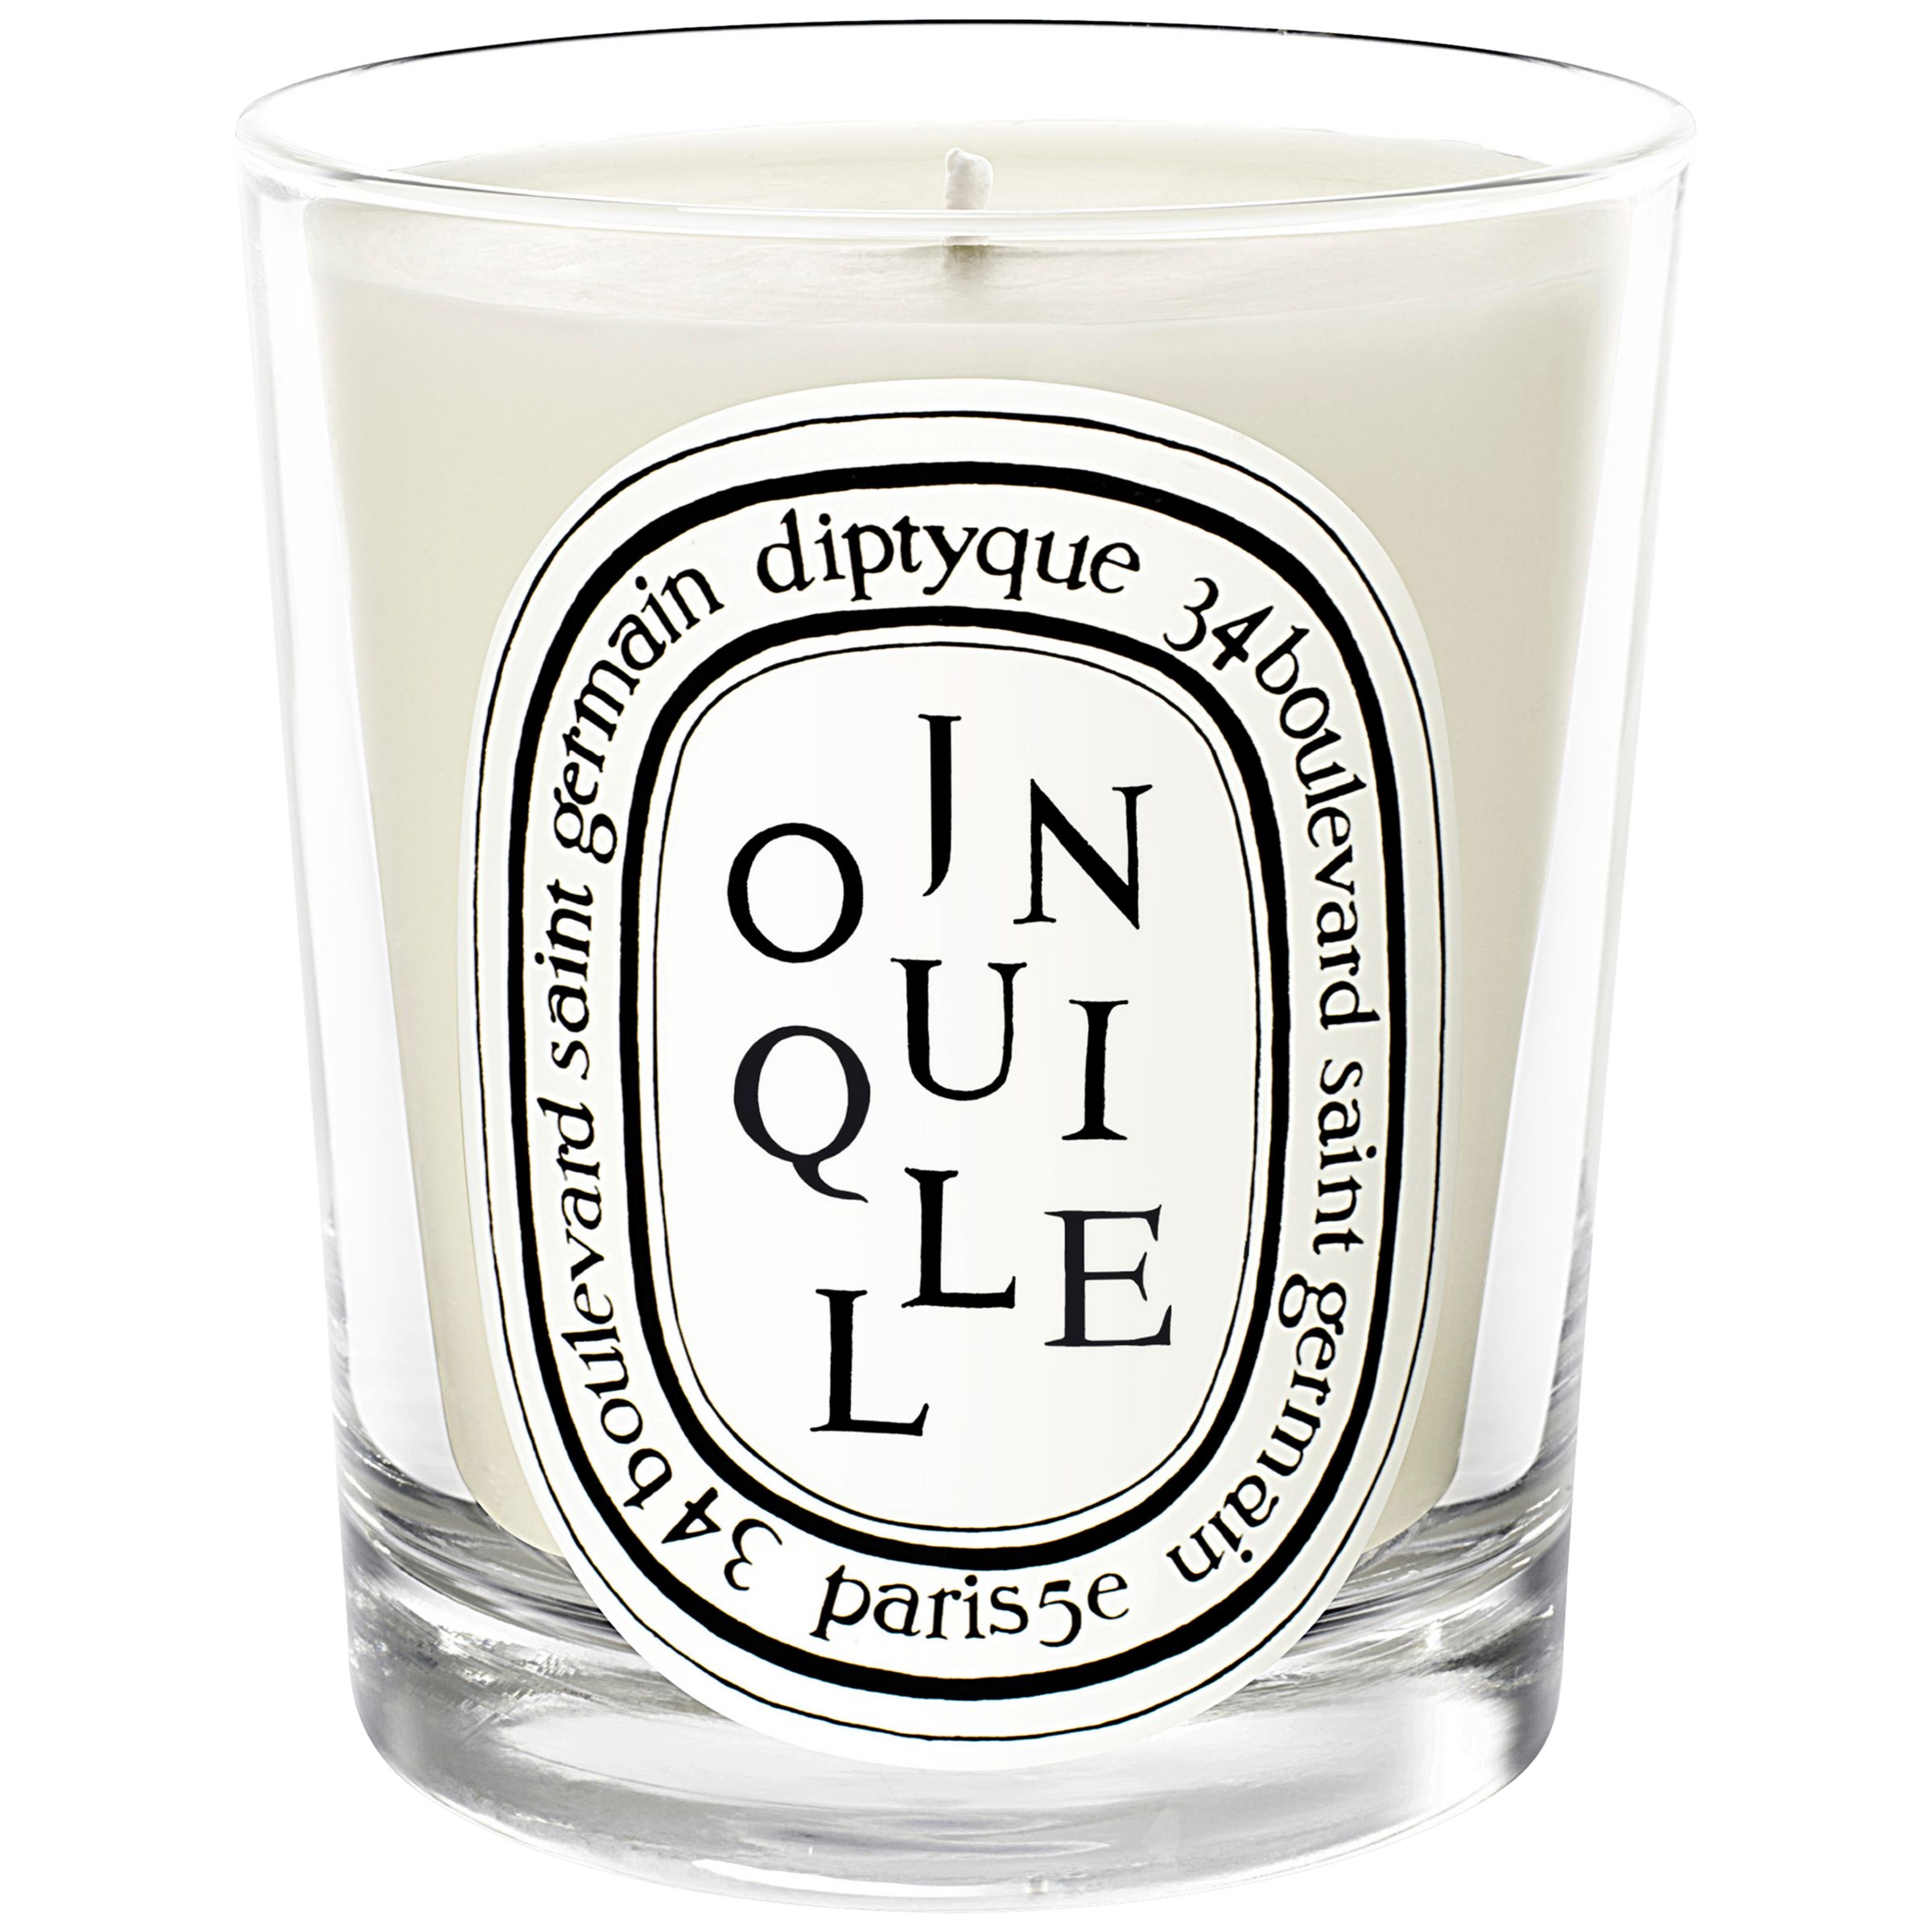 Diptyque Jonquille Candle, 190g 465072